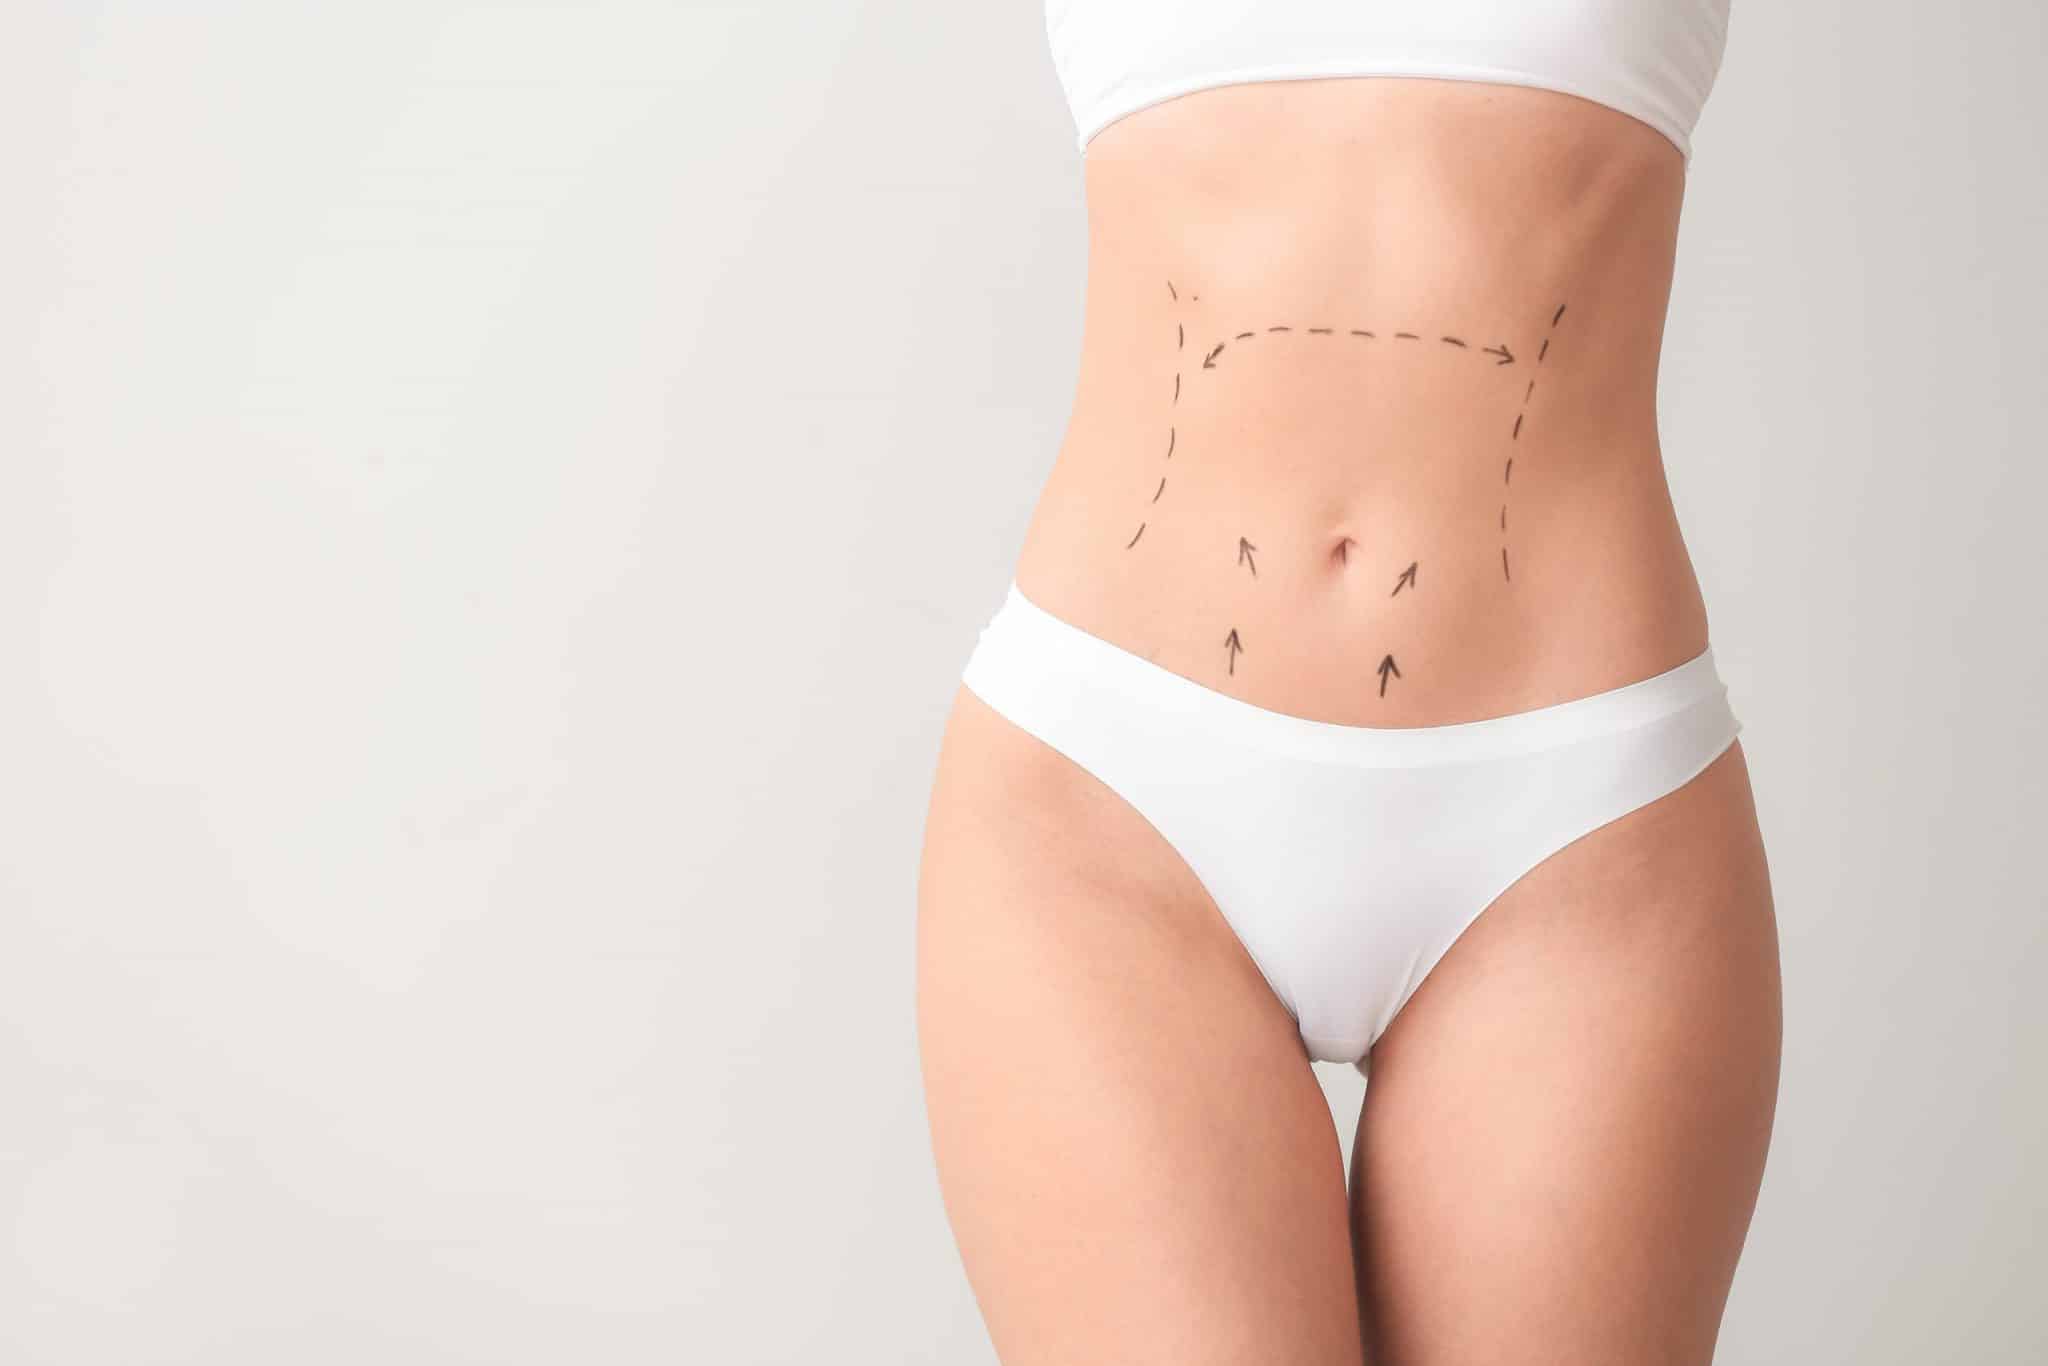 Is Muscle Repair with Tummy Tuck Always Necessary? - Power Plastic